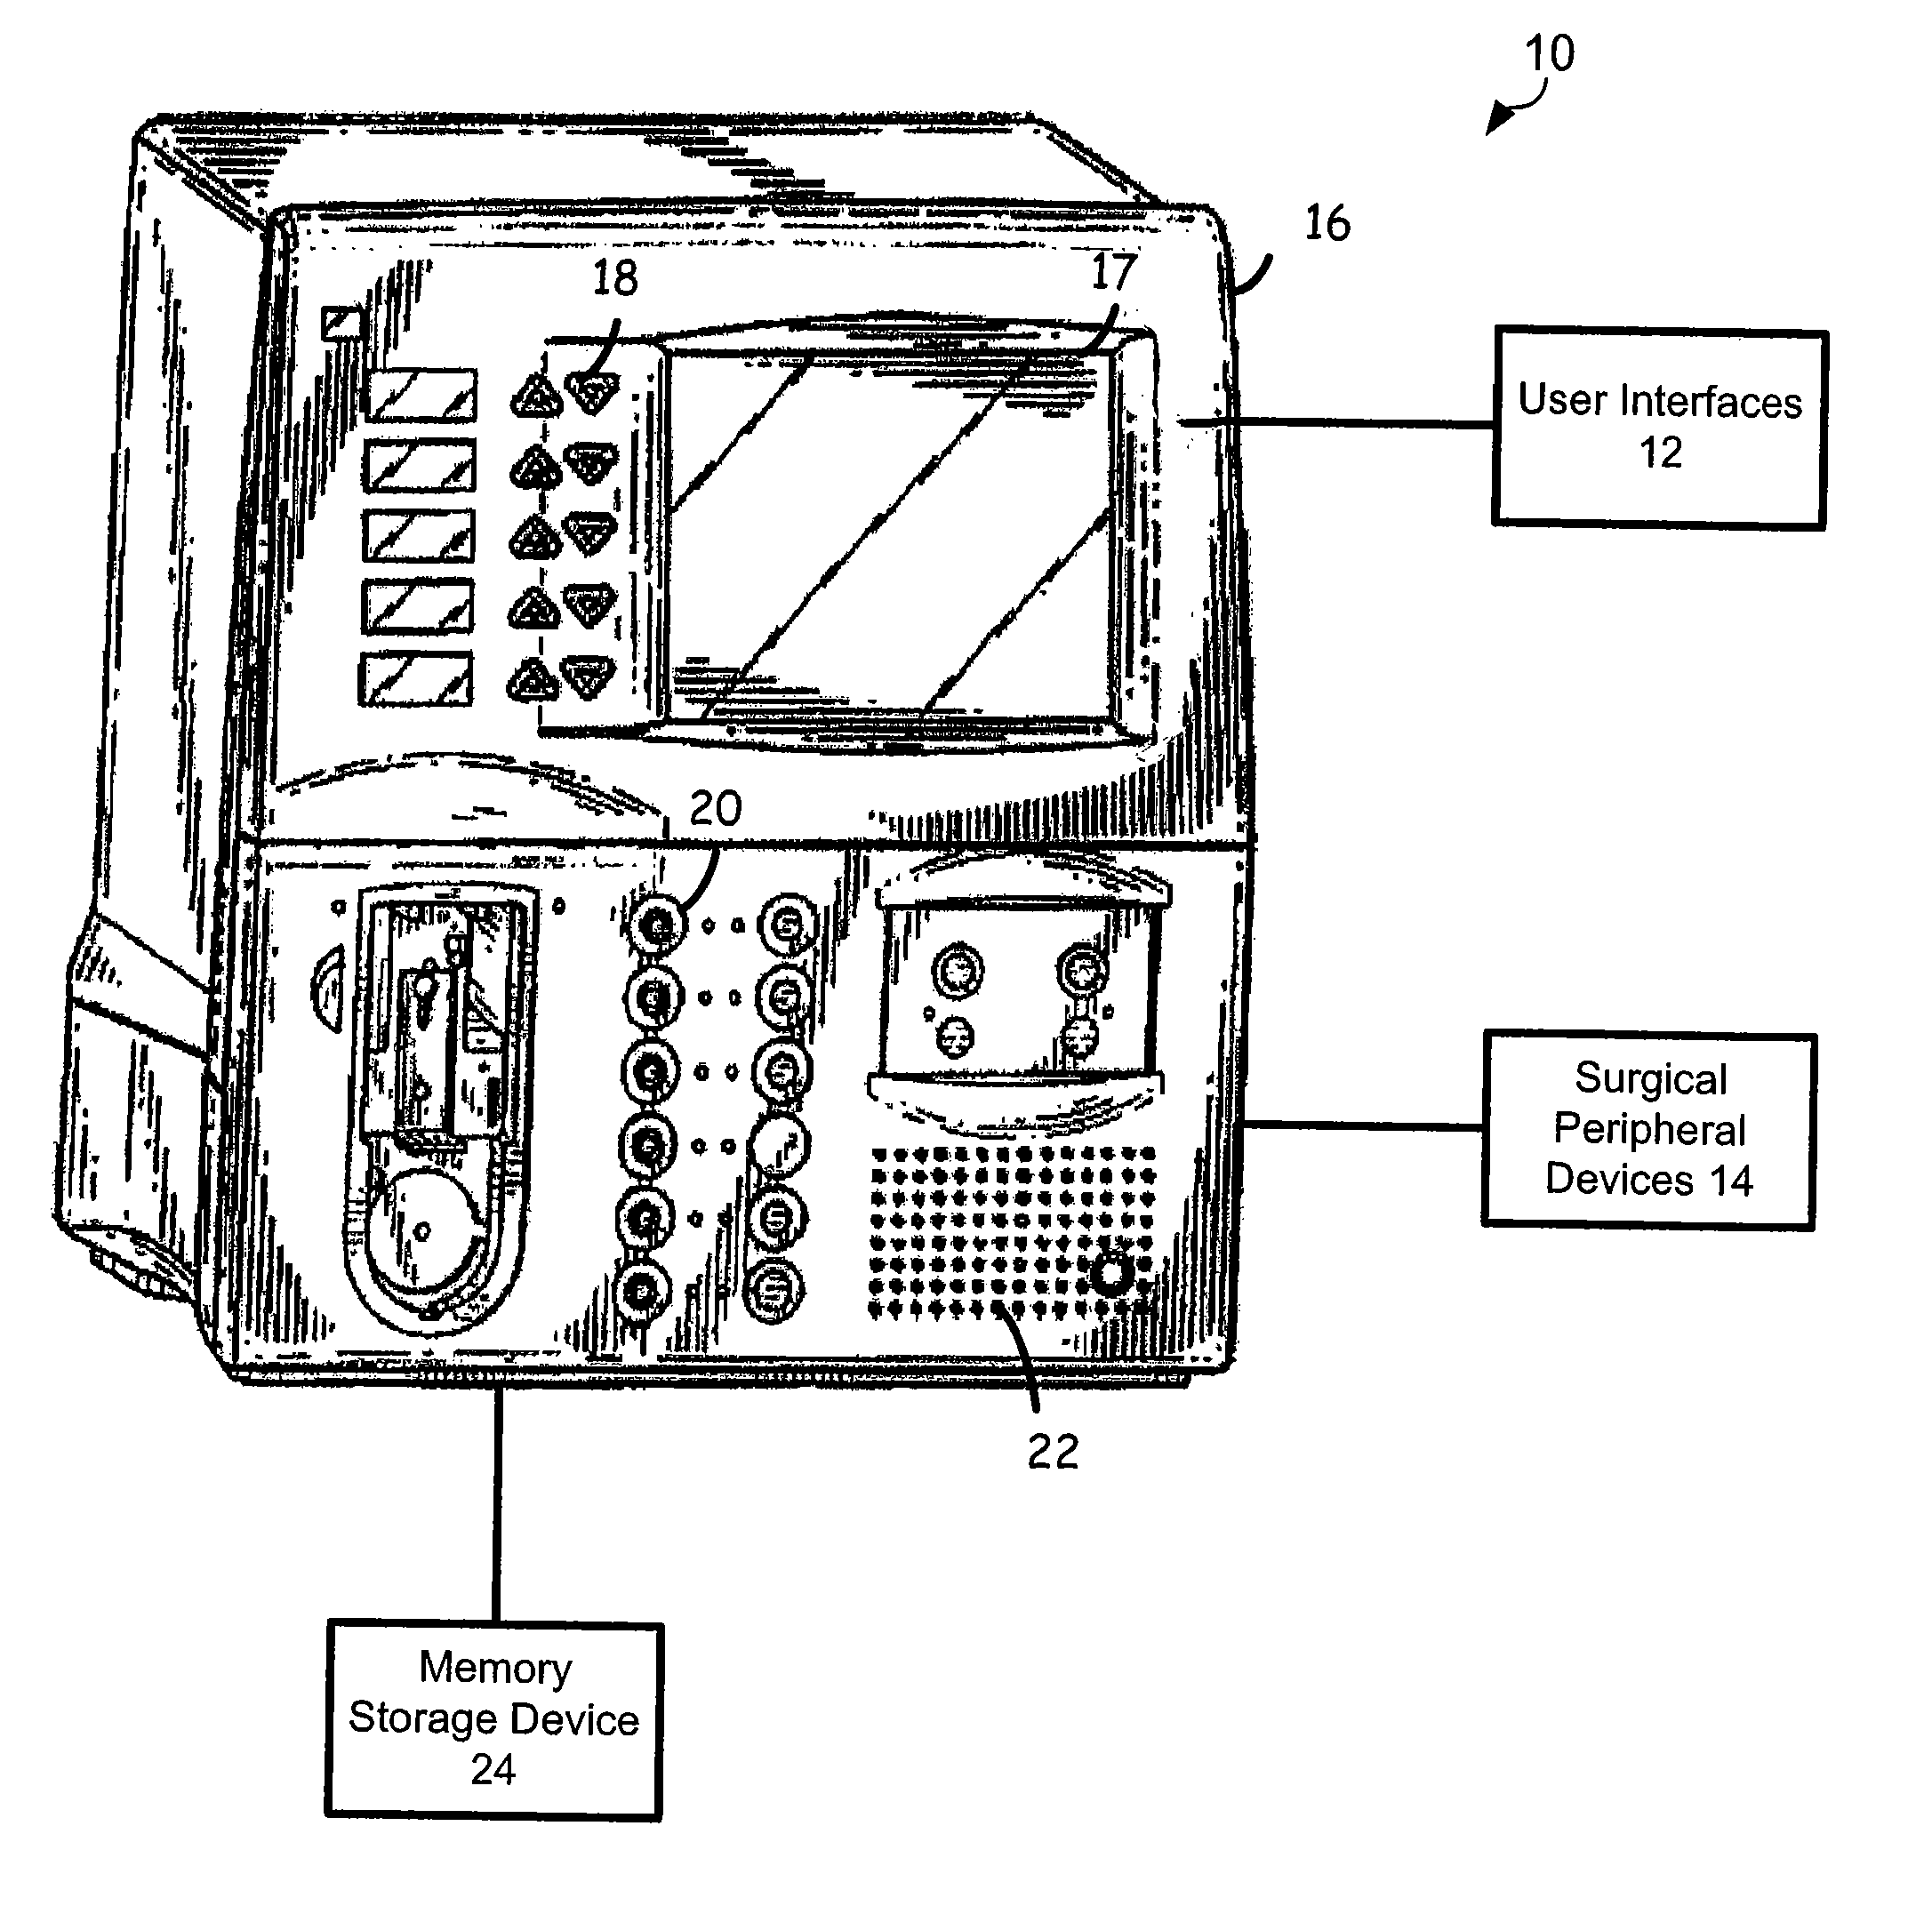 Surgical console operable to playback multimedia content